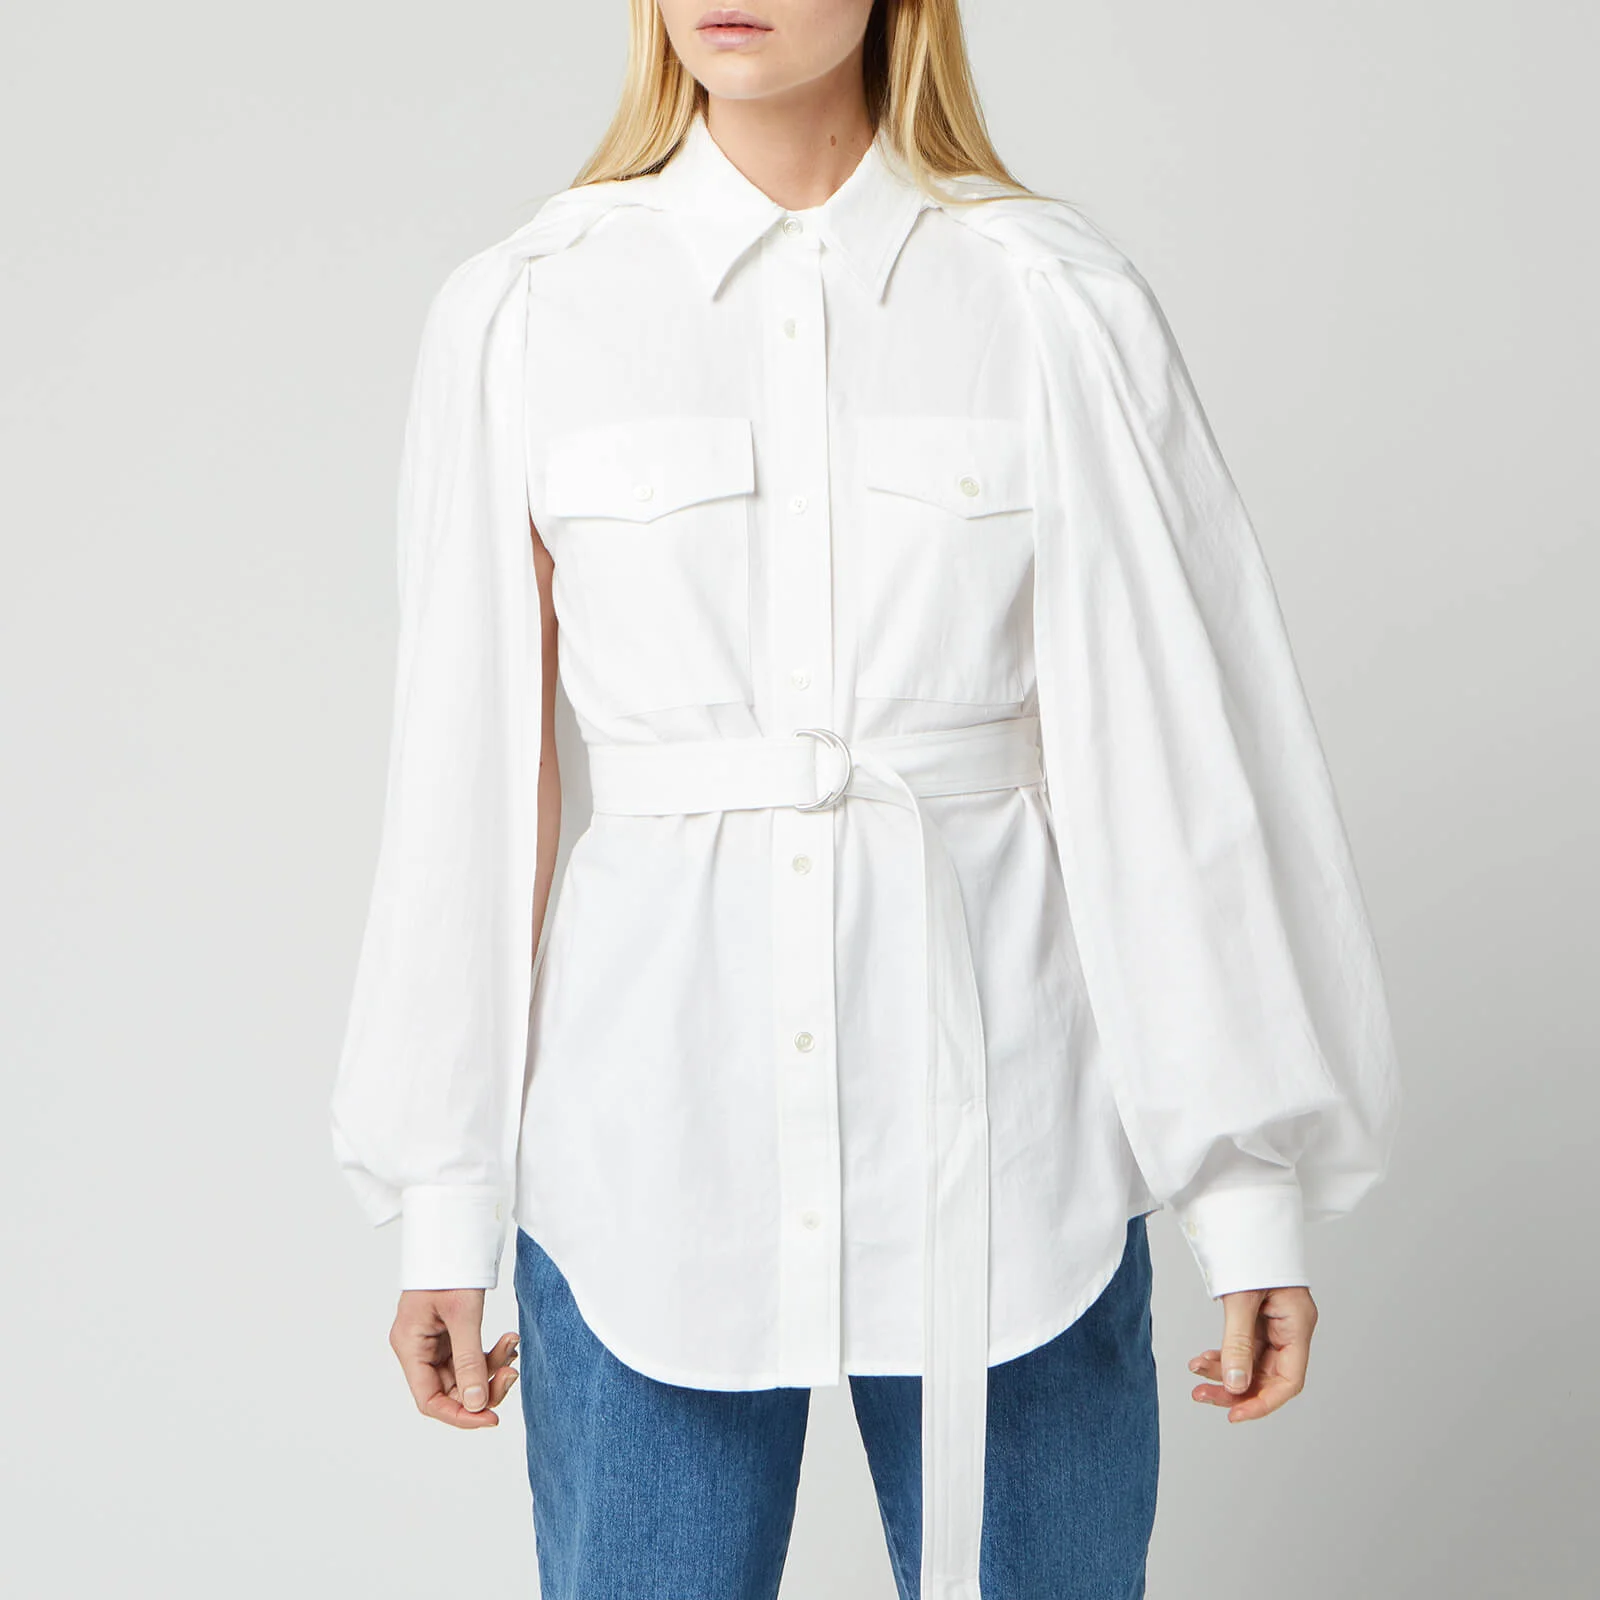 JW Anderson Women's Trench Shirt - White Image 1